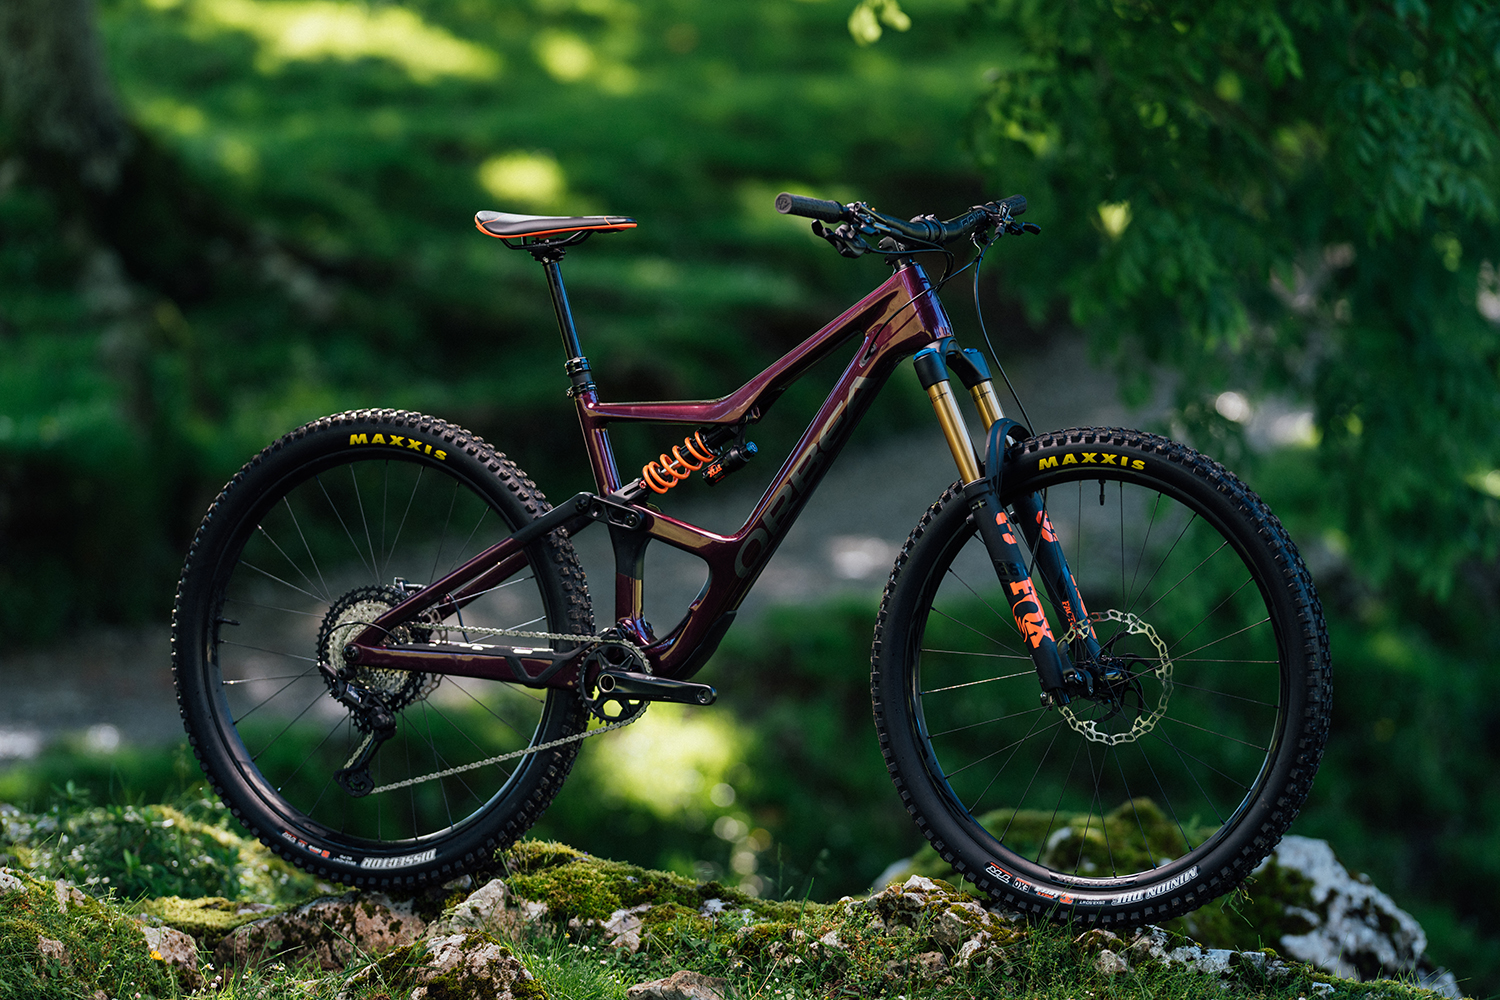 David Golay Reviews the Orbea Occam LT for Blister